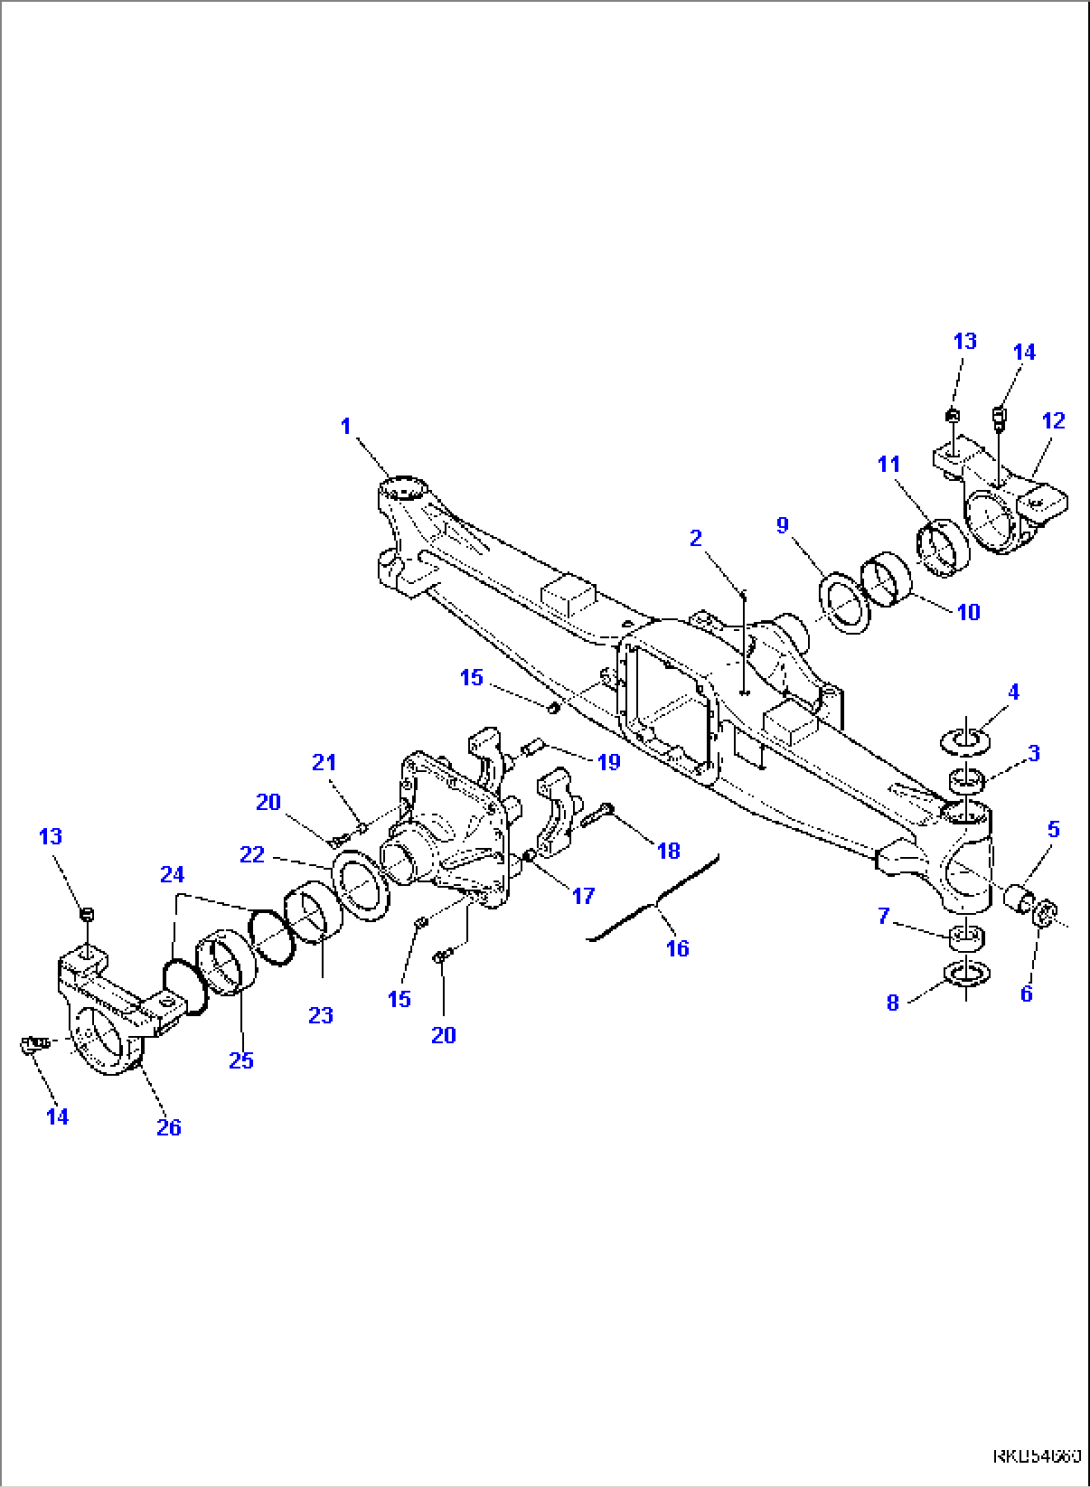 FRONT AXLE (1/7)